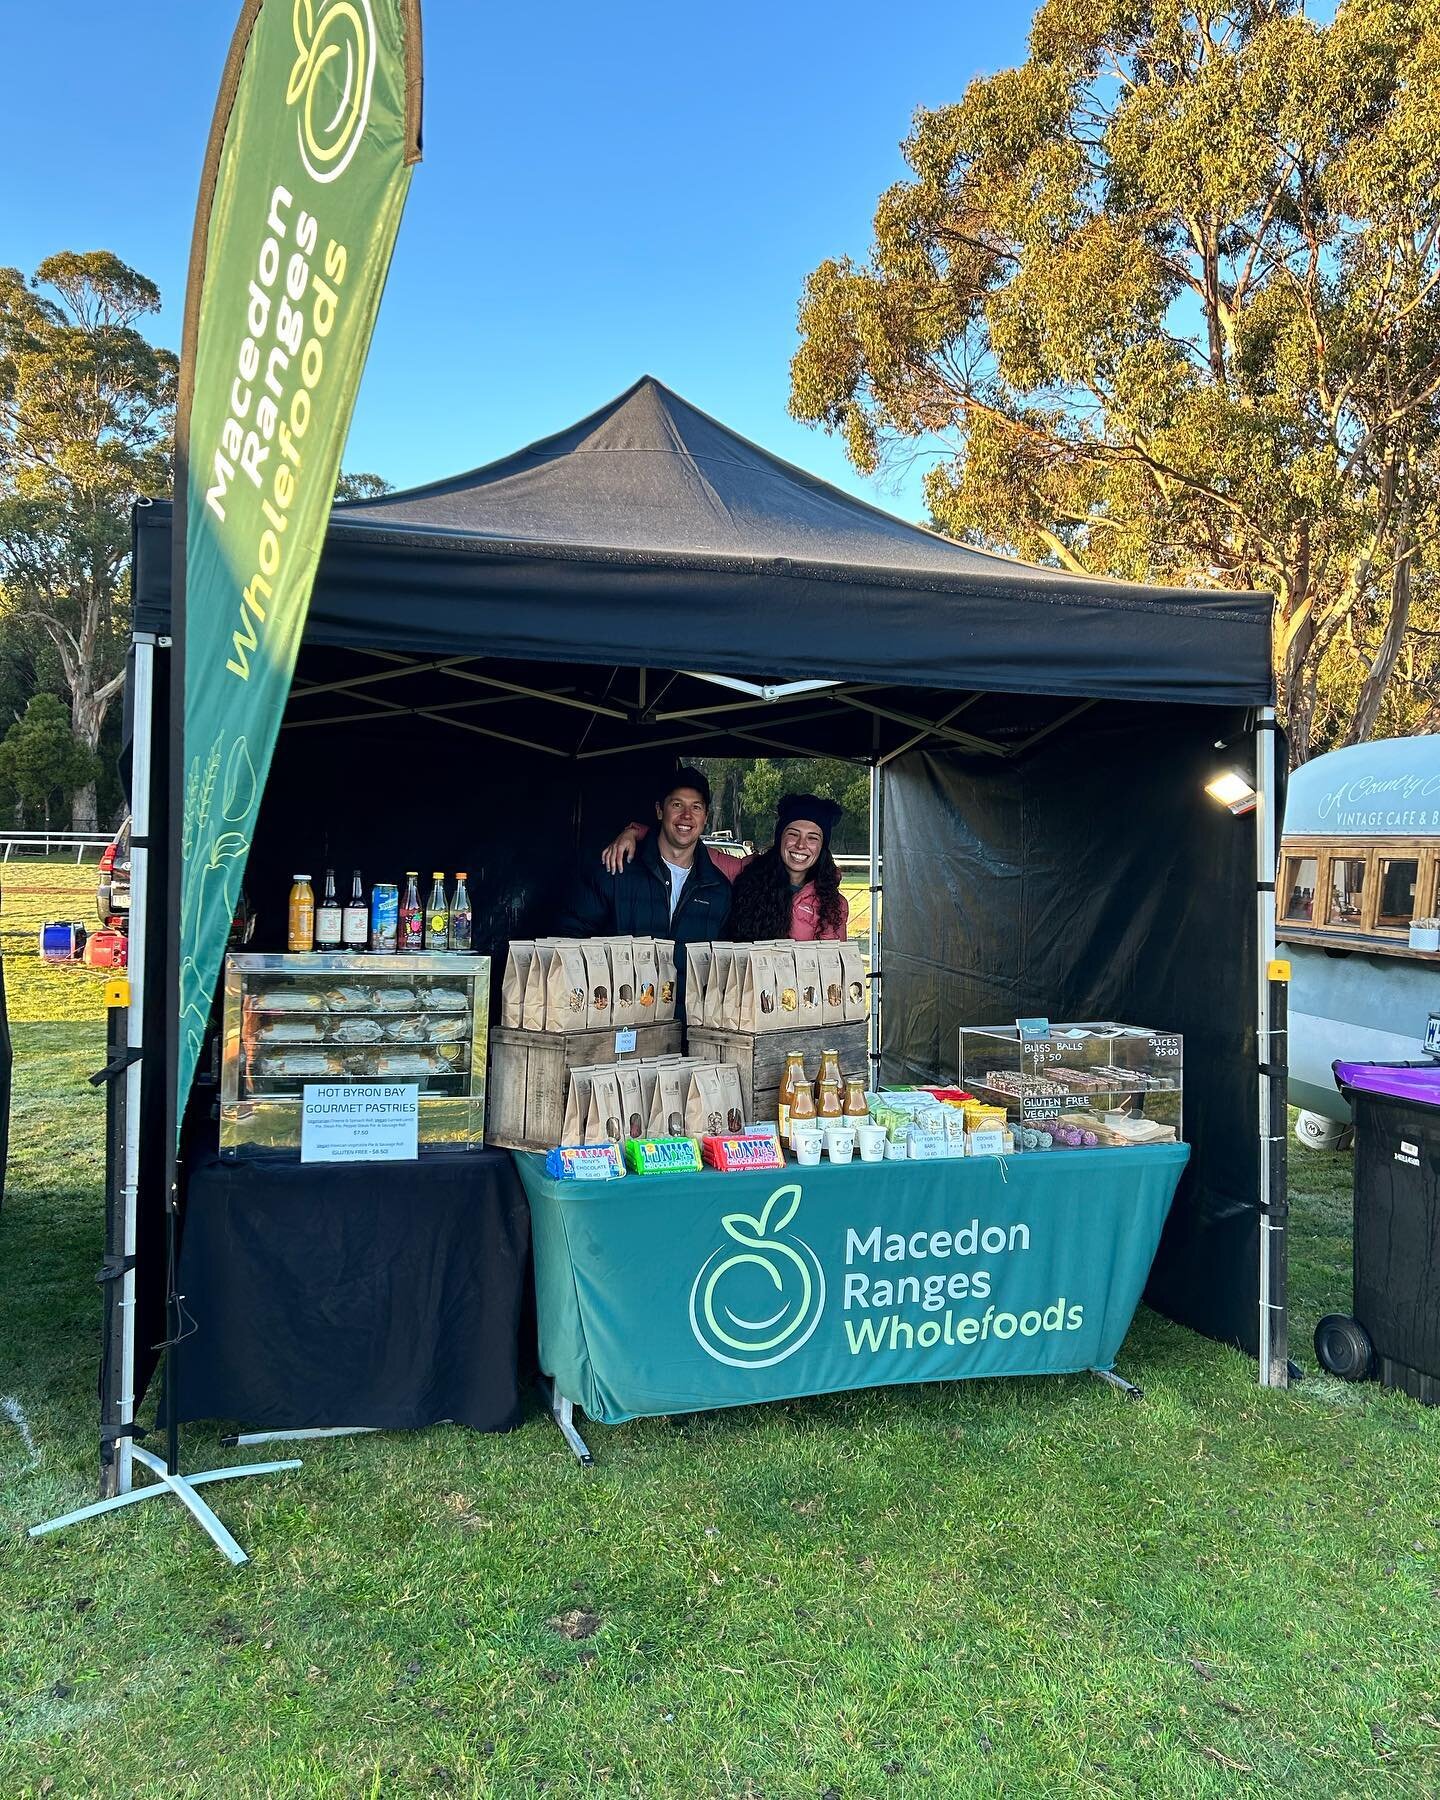 We had an unbelievable morning at Run the Rock! 
The Atmosphere 🙌
The Views 🙌
The Team 🙌
The whole setup was EPIC! 
Can&rsquo;t wait to do it all again next year 🤩
#solemotive #runtherock #macedonranges #gisbornevictoria #hangingrock #localbusine